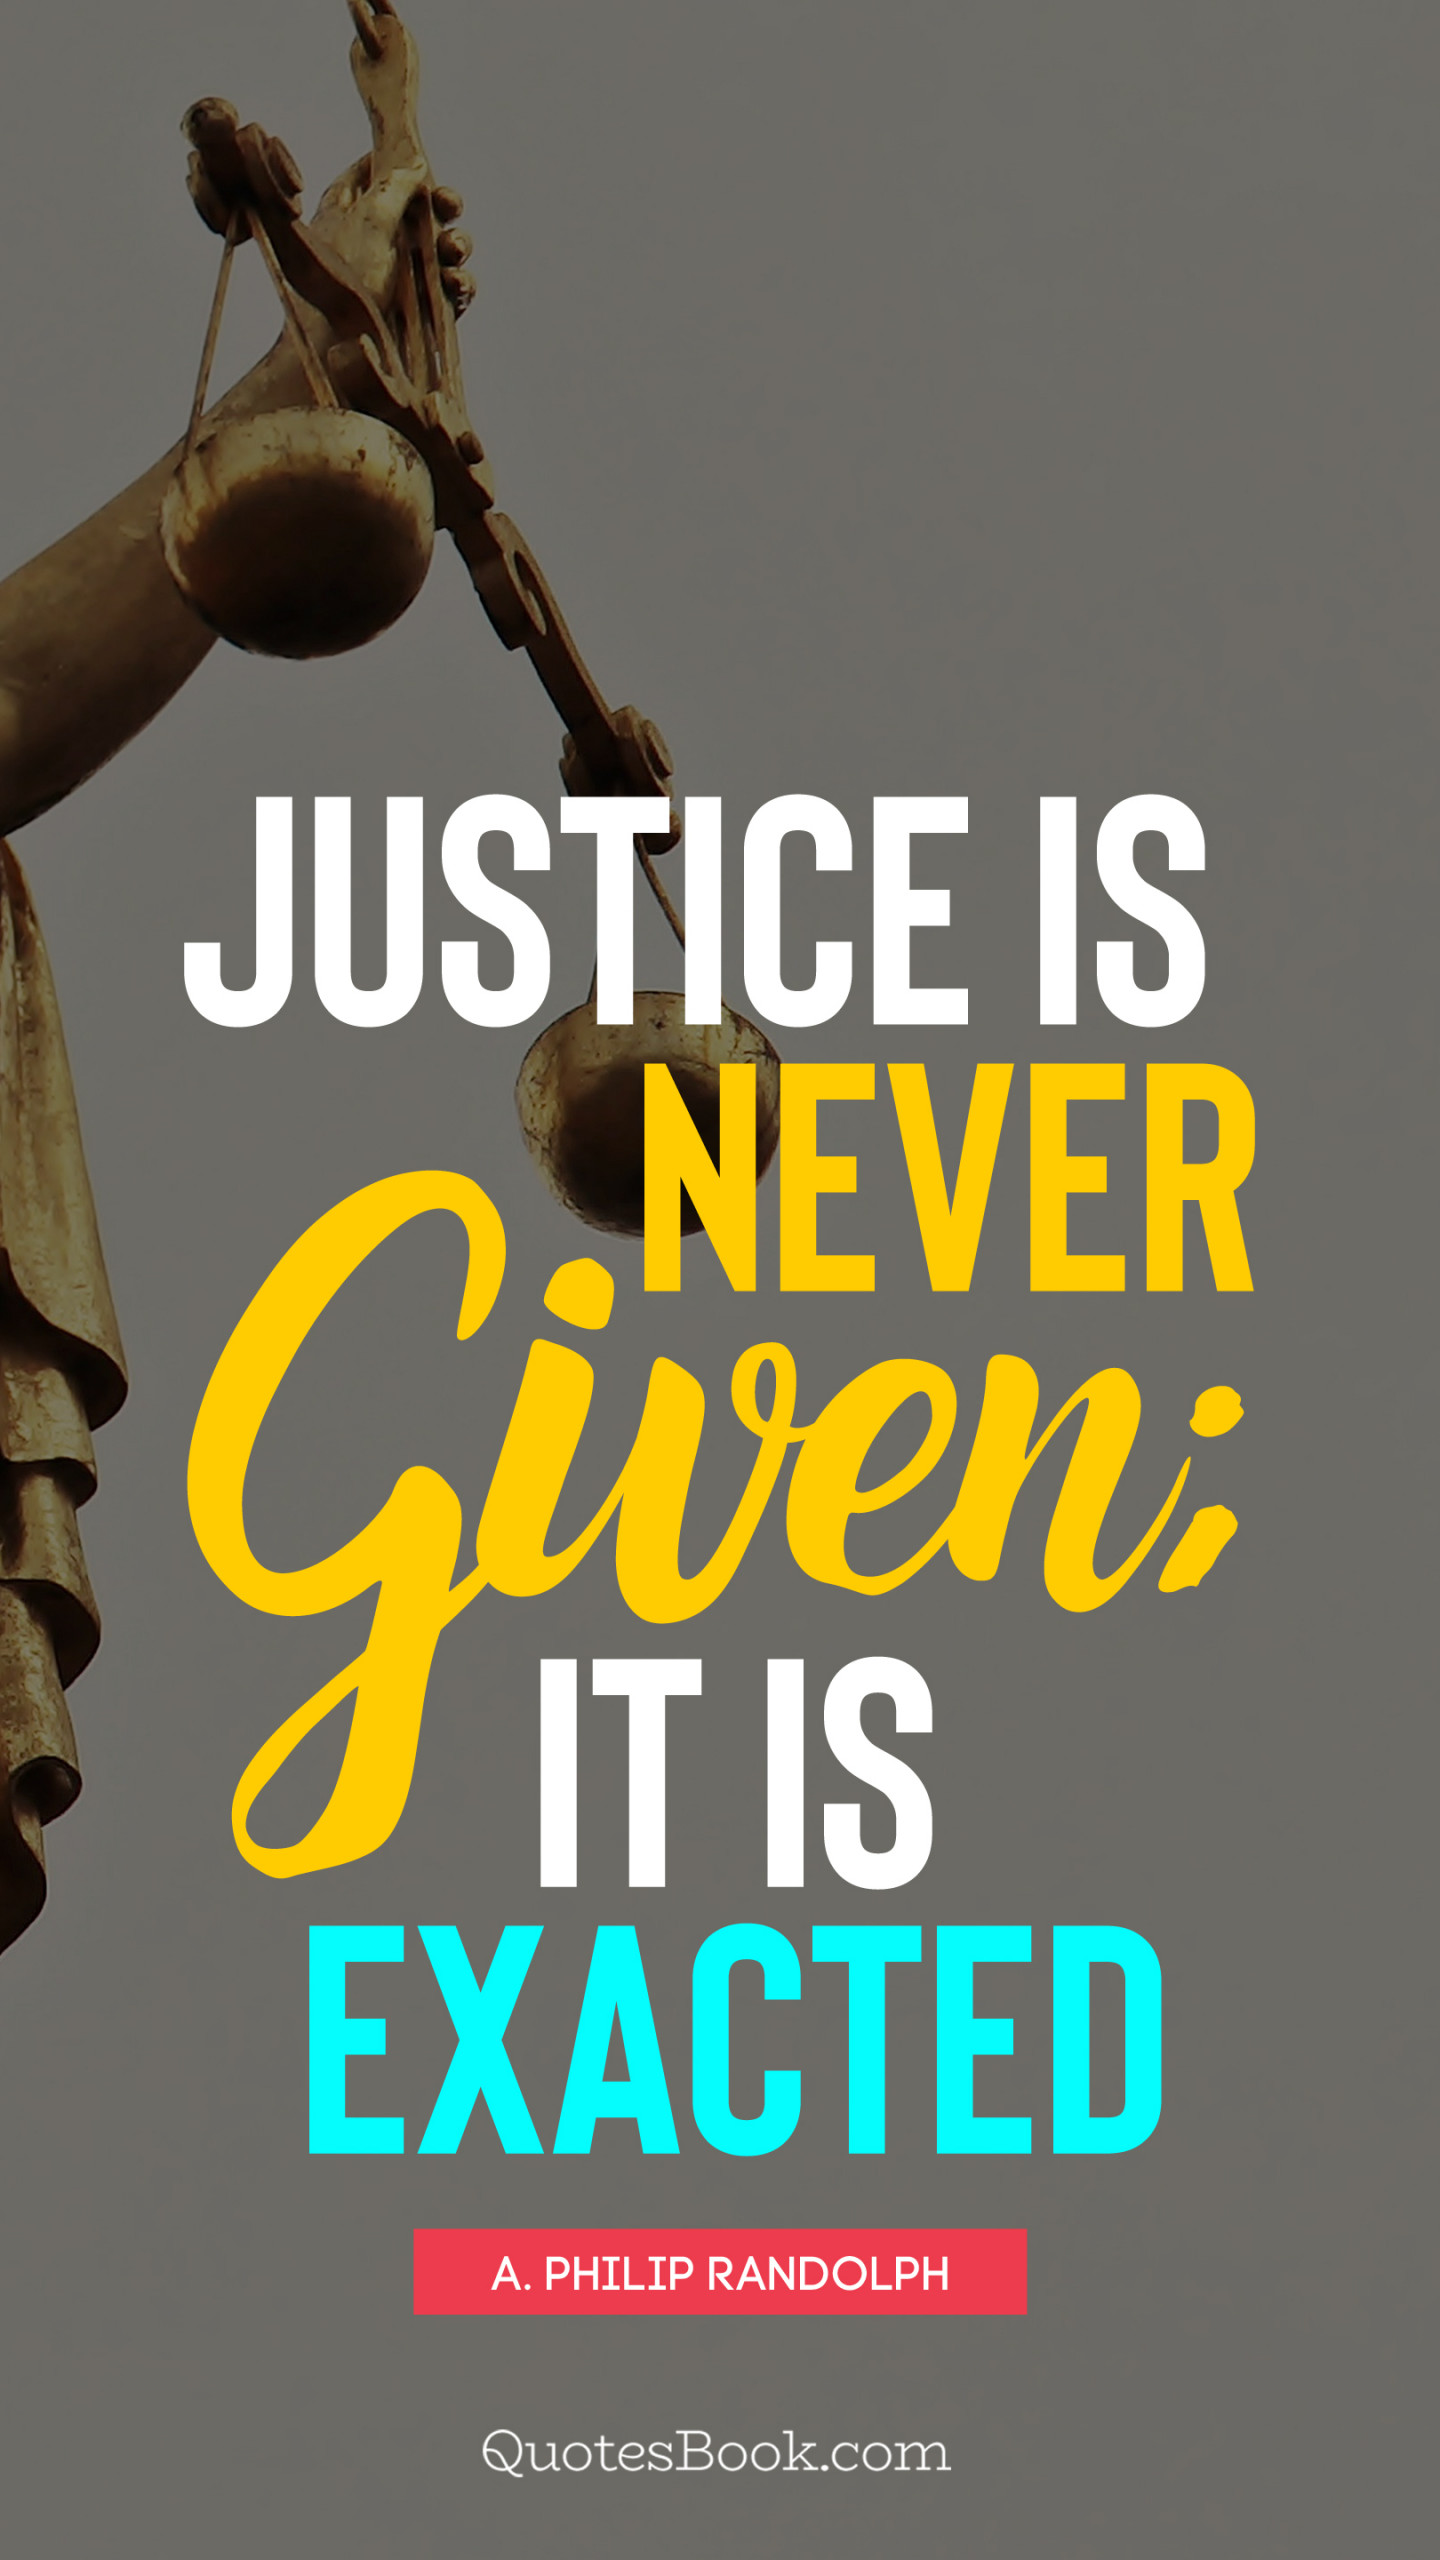 justice is never given it is exacted 1440x2560 3582